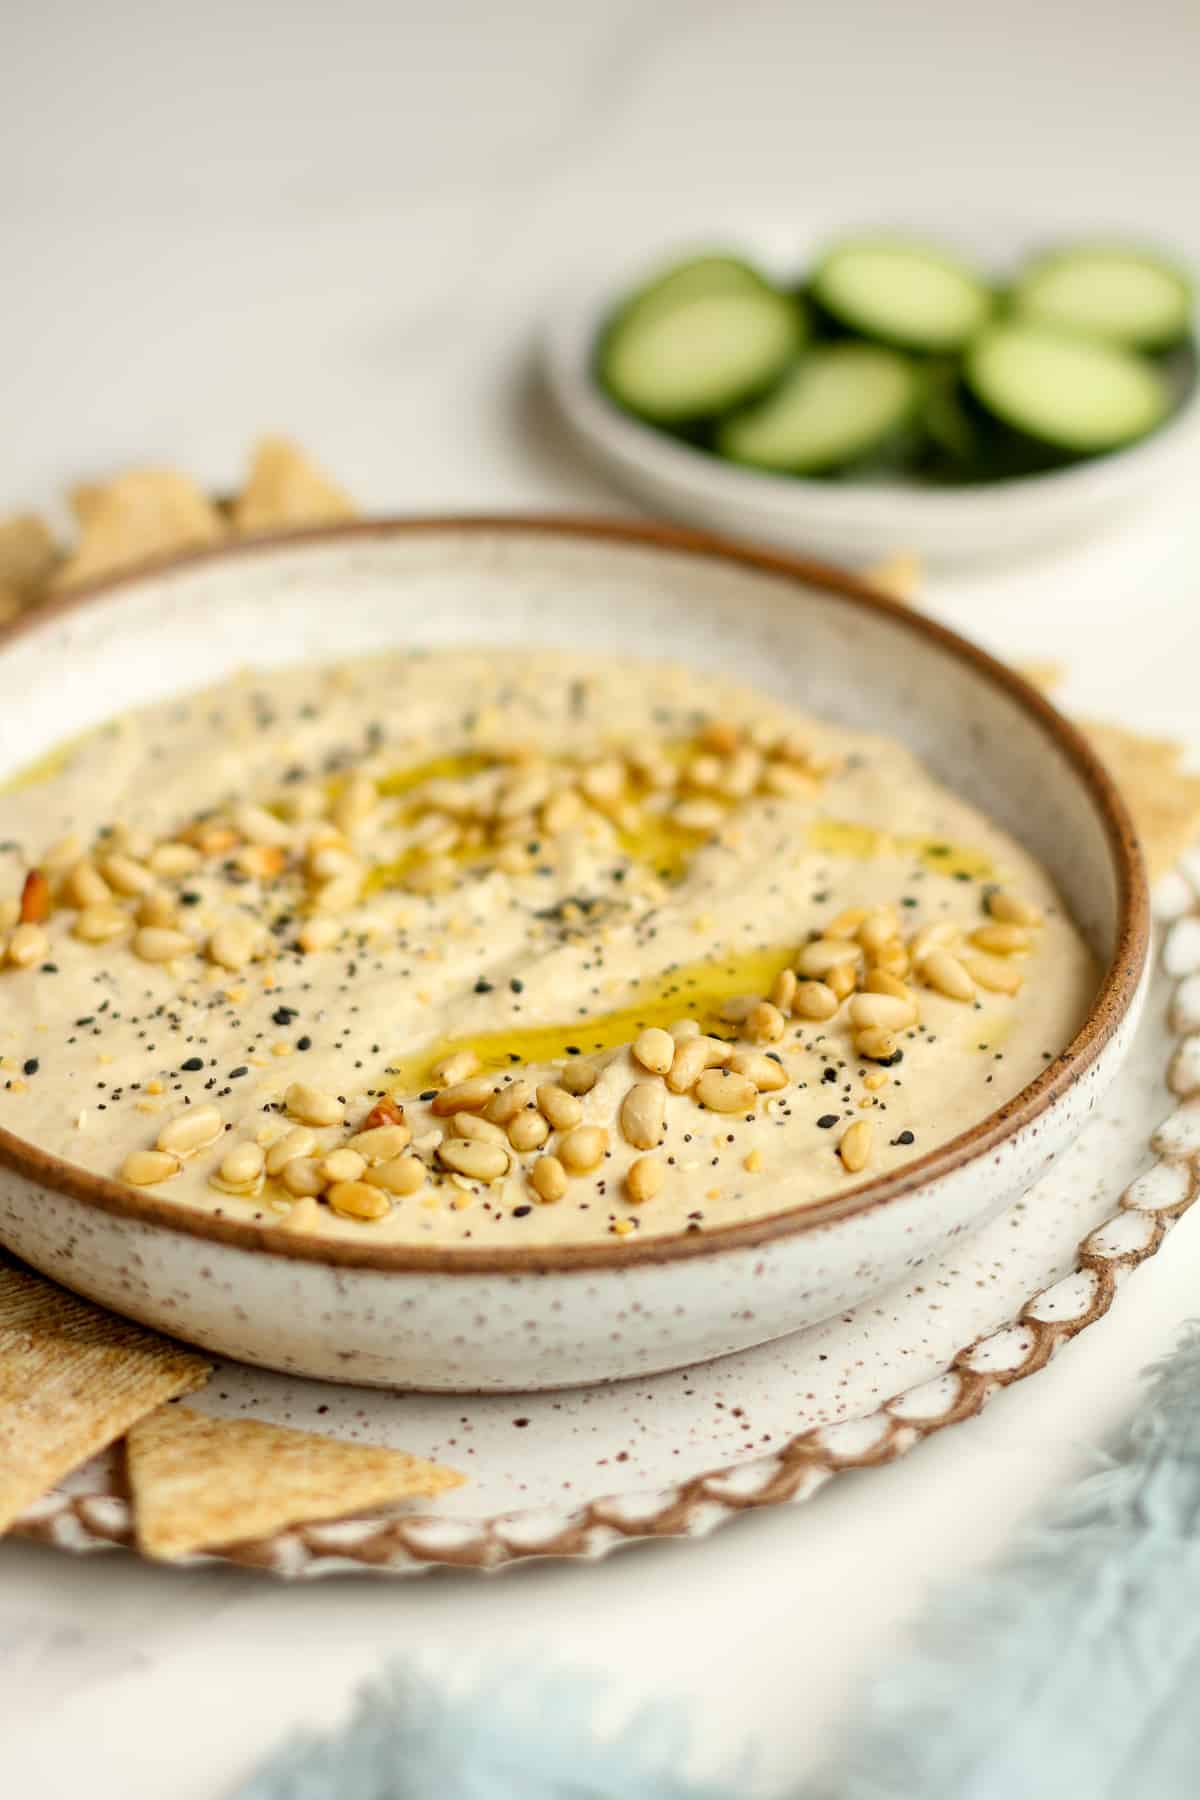 Side view of a bowl of hummus with pine nuts and crackers and cucumbers.